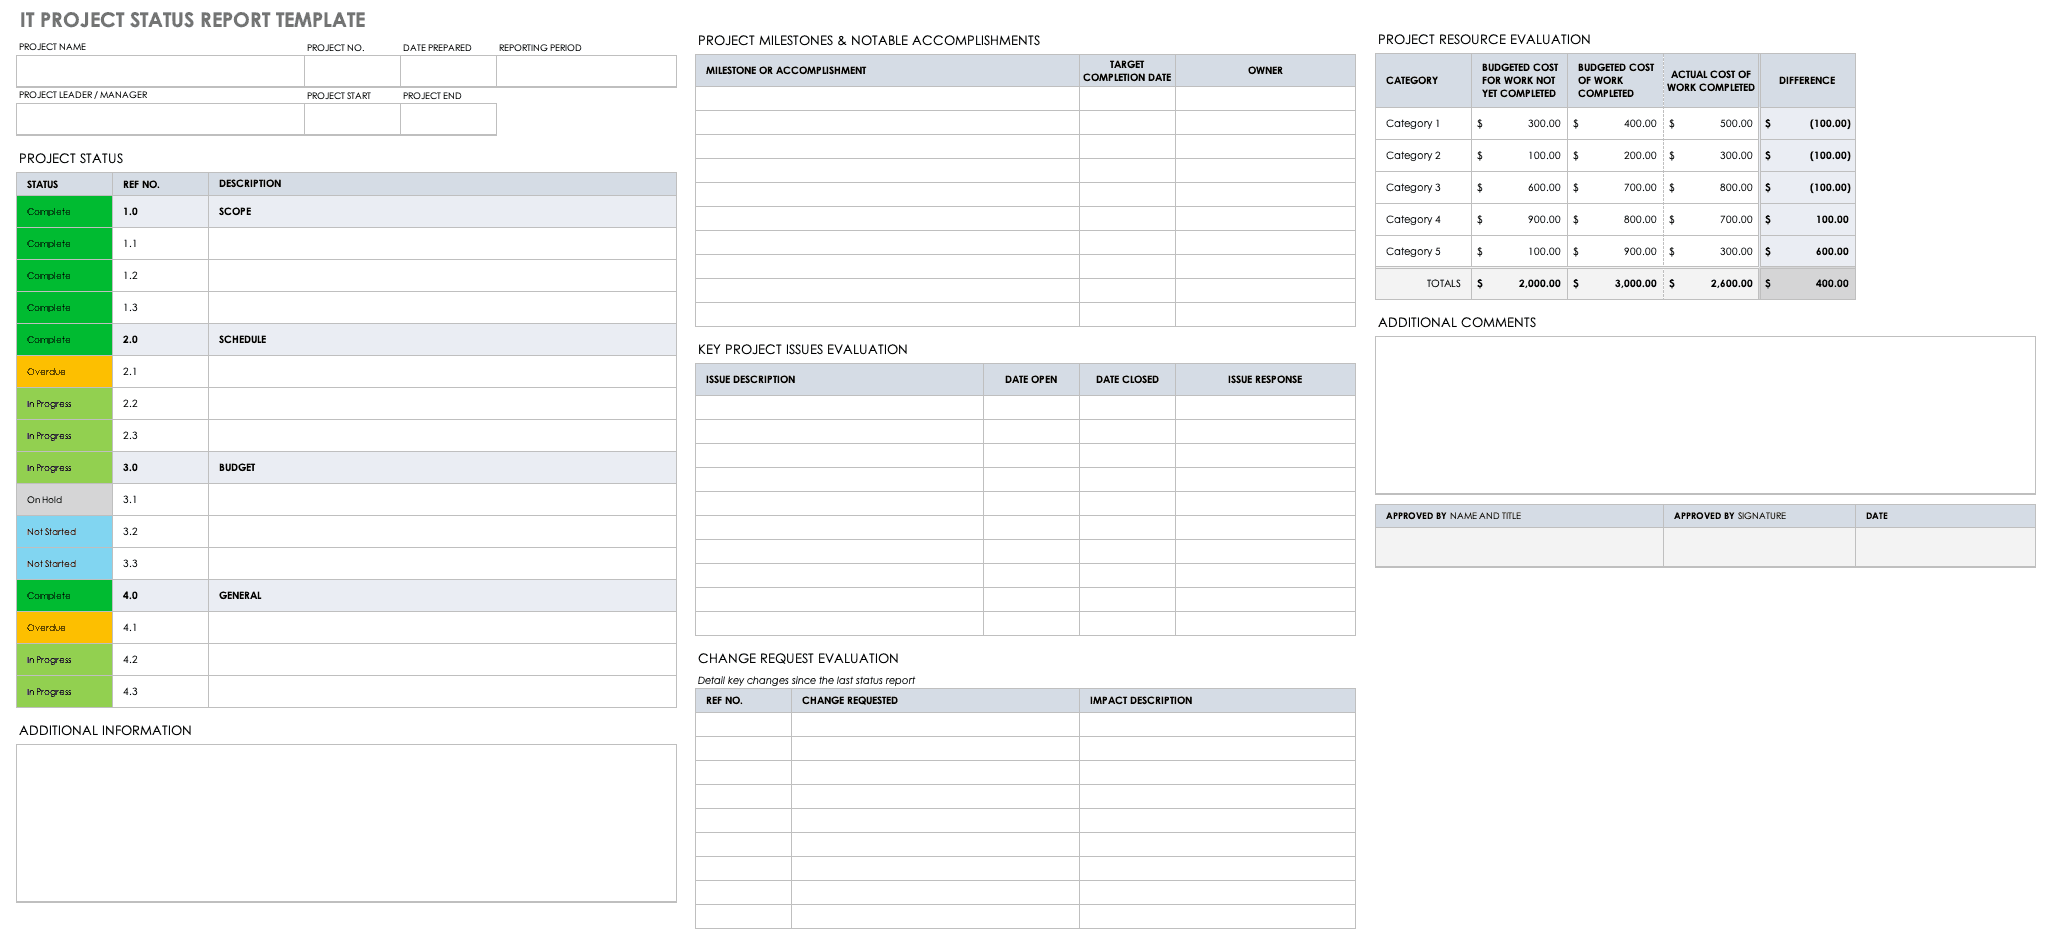 IT Project Status Report Template